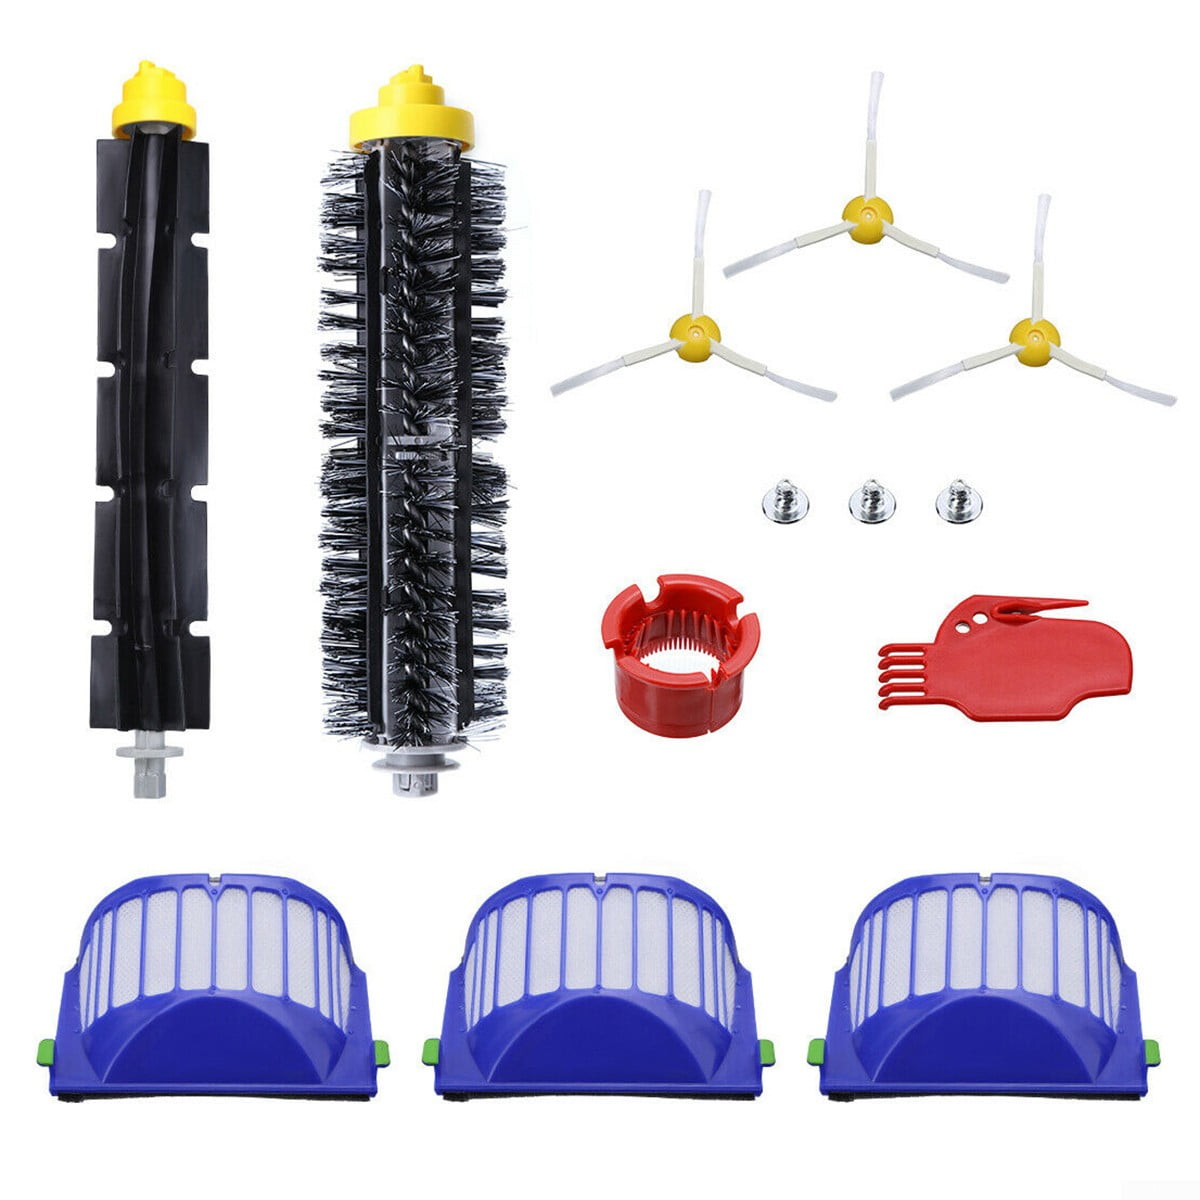 Replacement Parts Kit For iRobot Roomba 600 Series Vacuum Filter Brush Cleaner 